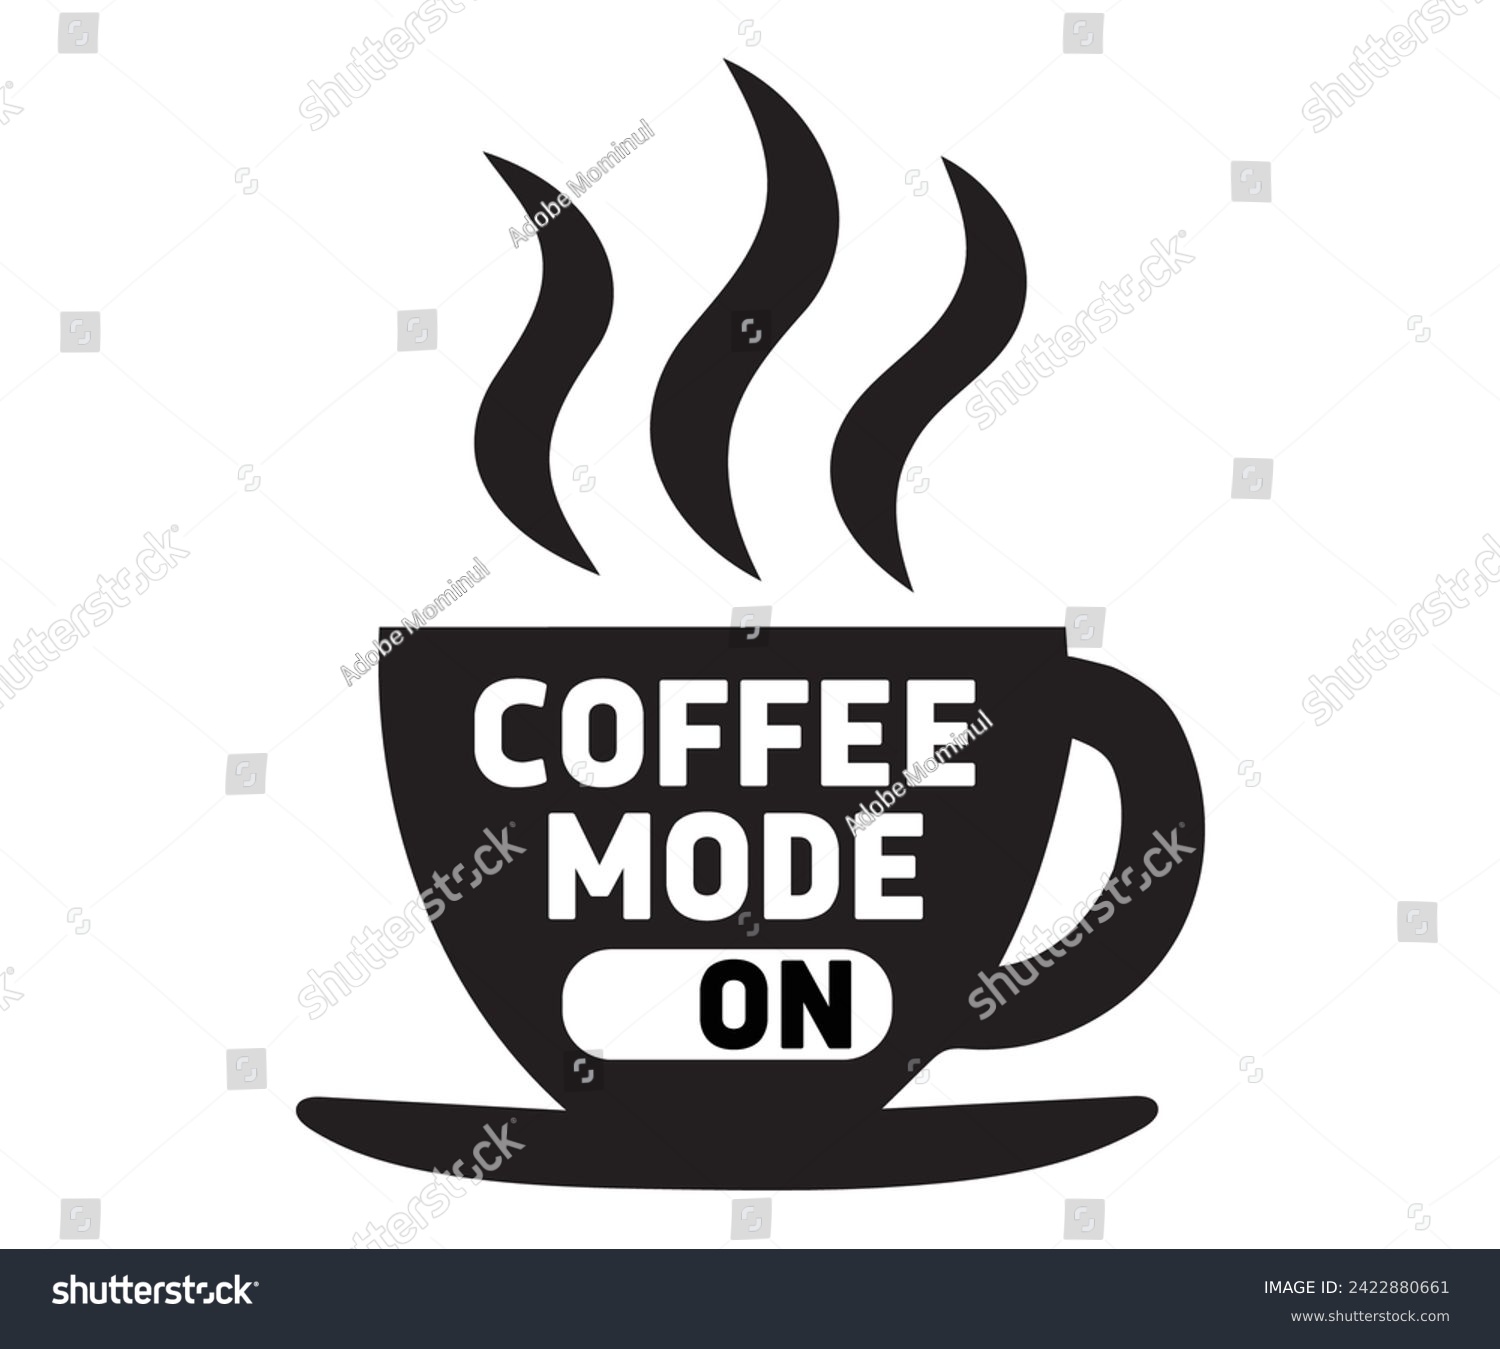 SVG of Coffee Mode On Svg,Coffee Svg,Coffee Retro,Funny Coffee Sayings,Coffee Mug Svg,Coffee Cup Svg,Gift For Coffee,Coffee Lover,Caffeine Svg,Svg Cut File,Coffee Quotes,Sublimation Design, svg